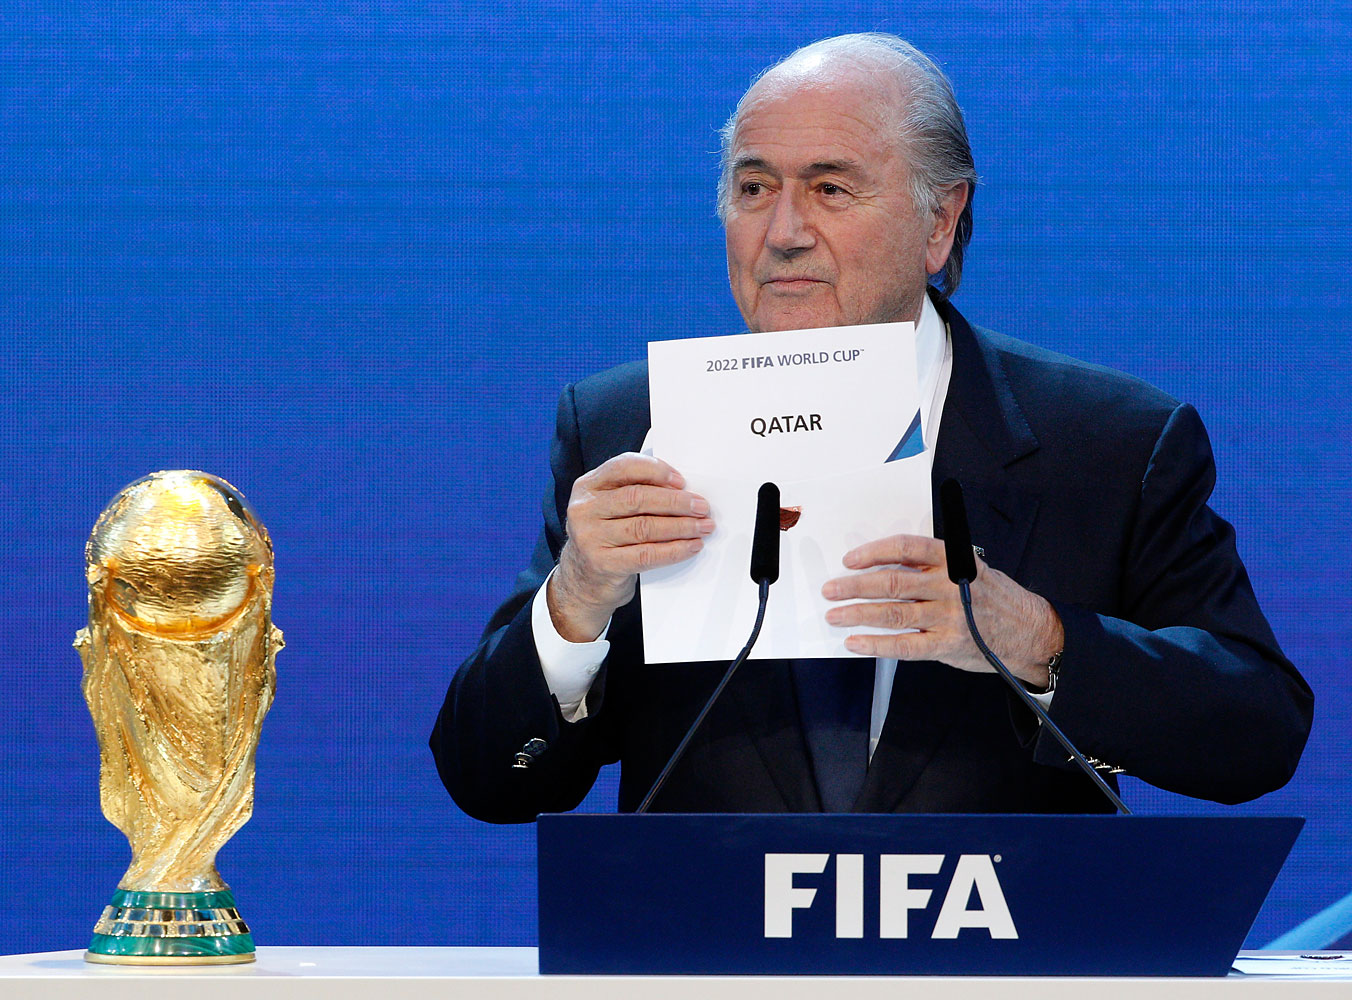 FIFA President Sepp Blatter announces Qatar as the host nation for the FIFA World Cup 2022  in Zurich